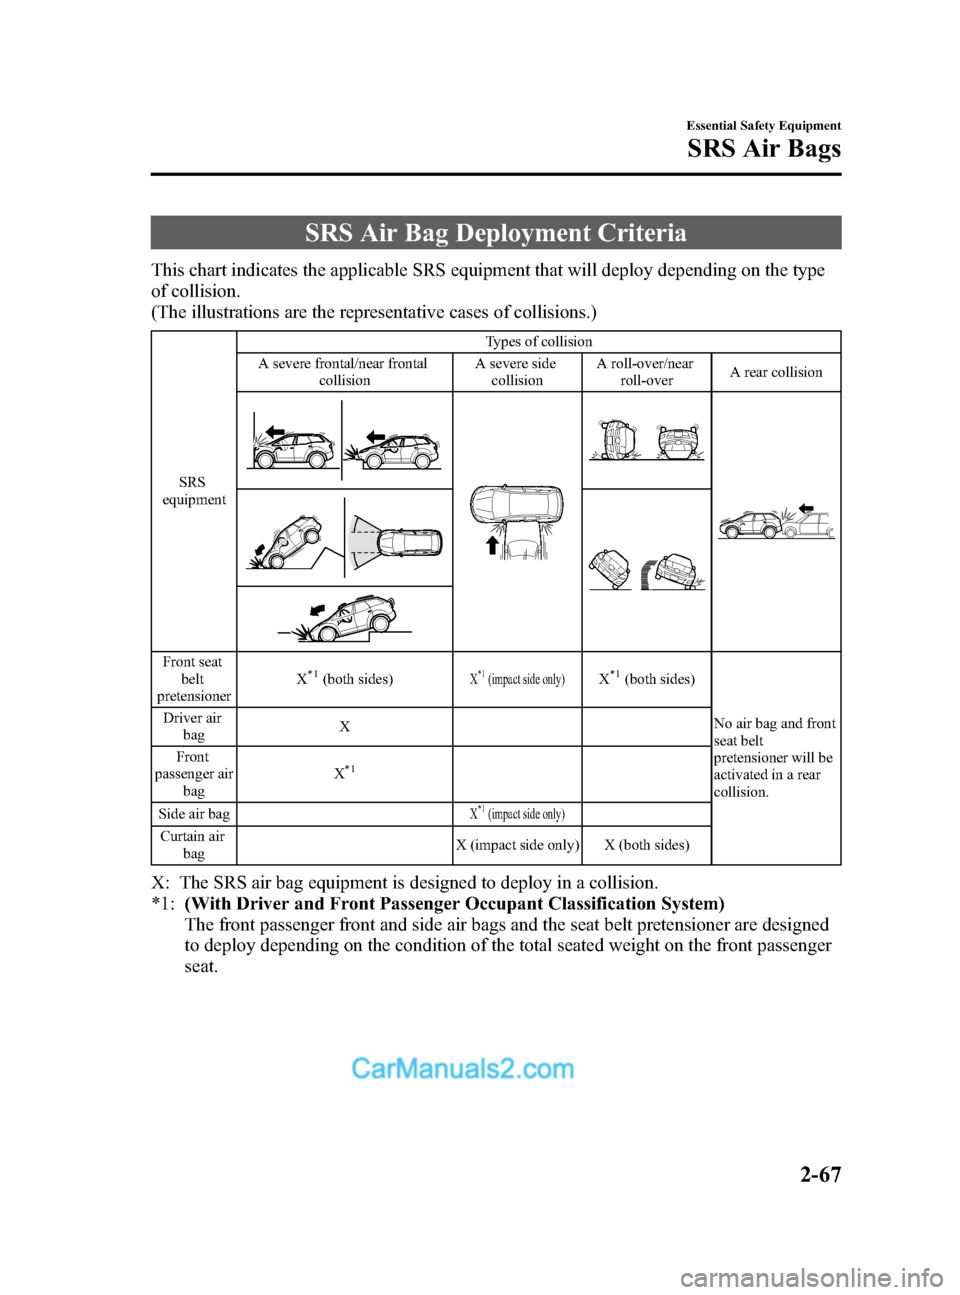 MAZDA MODEL CX-9 2015  Owners Manual (in English) Black plate (79,1)
SRS Air Bag Deployment Criteria
This chart indicates the applicable SRS equipment that will deploy depending on the type
of collision.
(The illustrations are the representative case